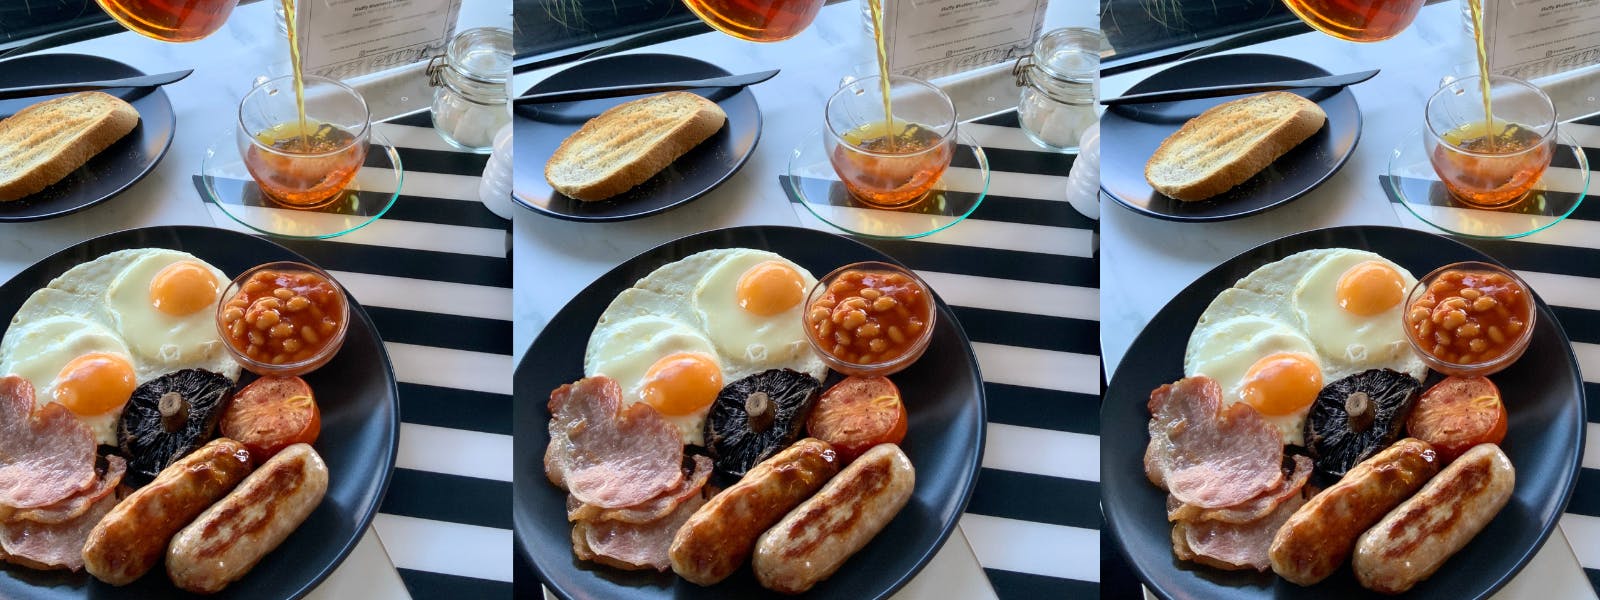 Full English Breakfast at Franklin Mount Guesthouse